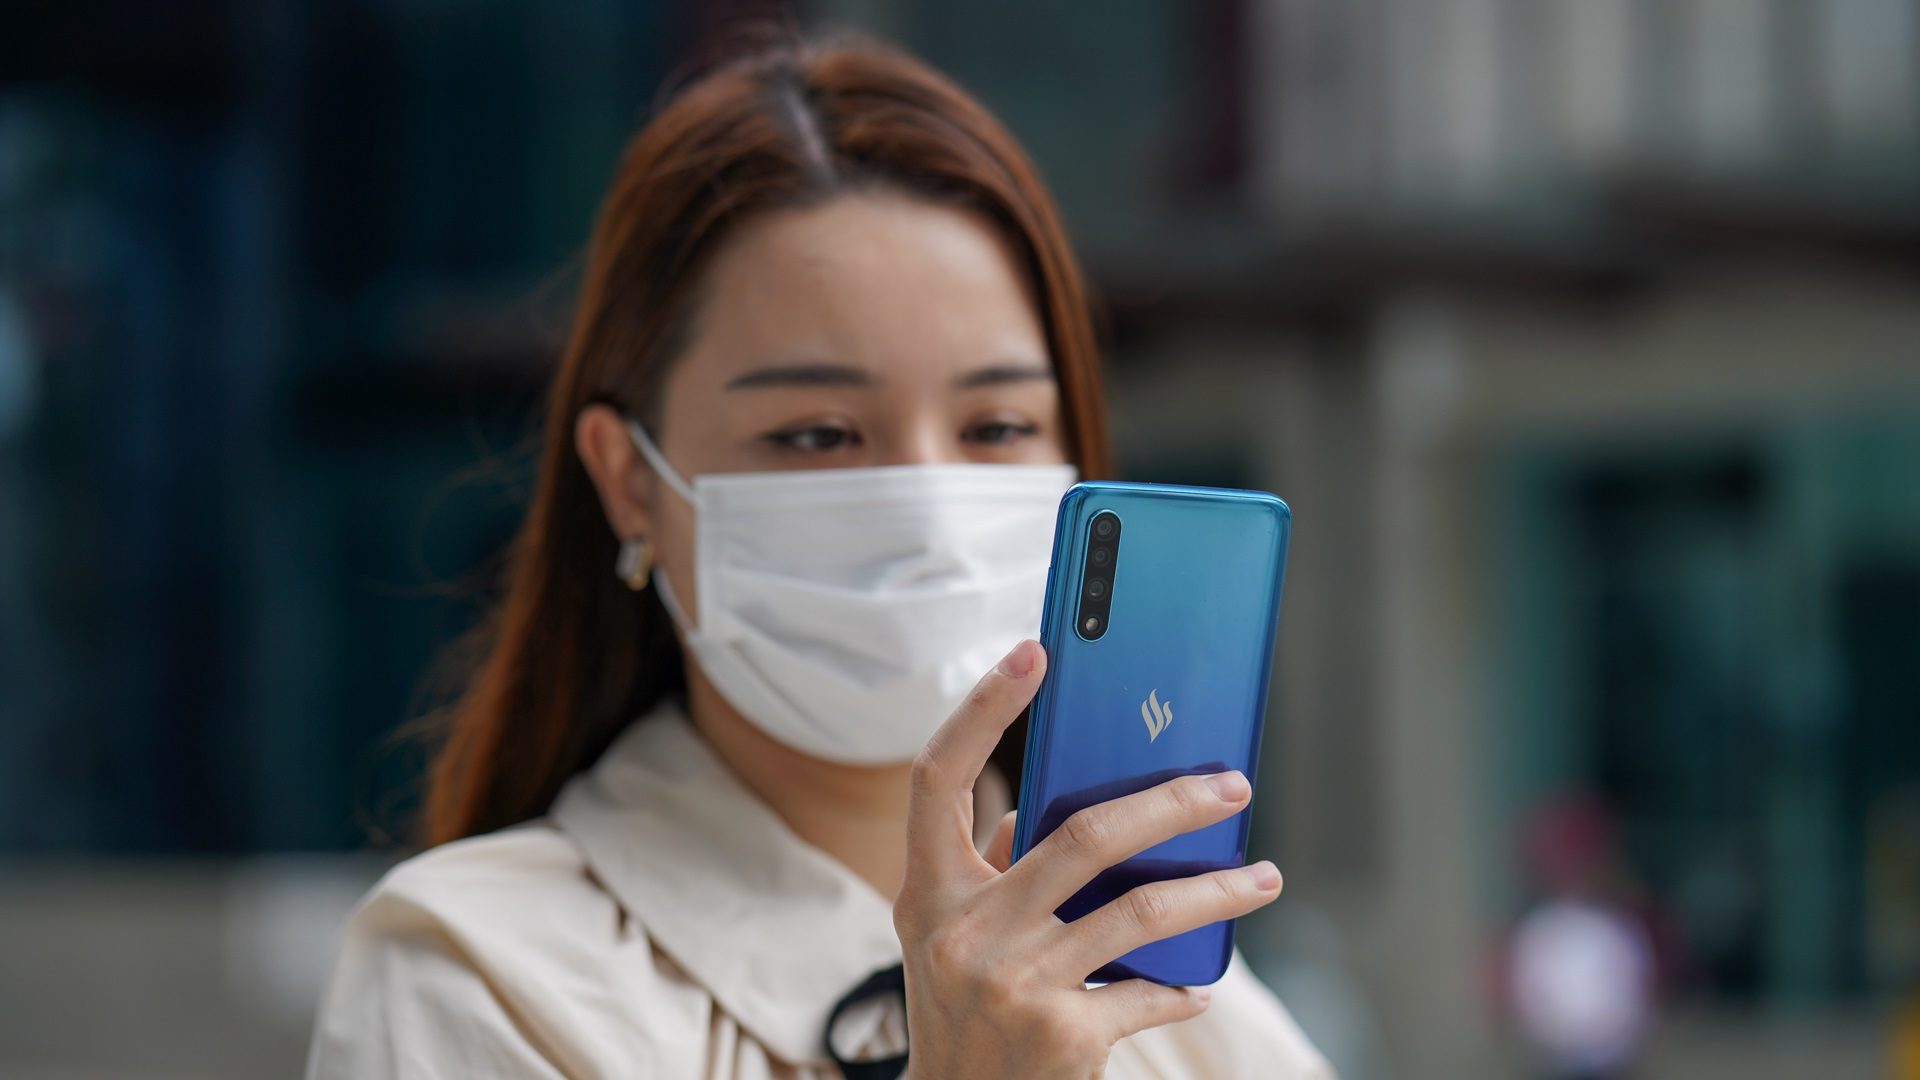 Vingroup develops masked facial recognition tech for smartphones in virus fight